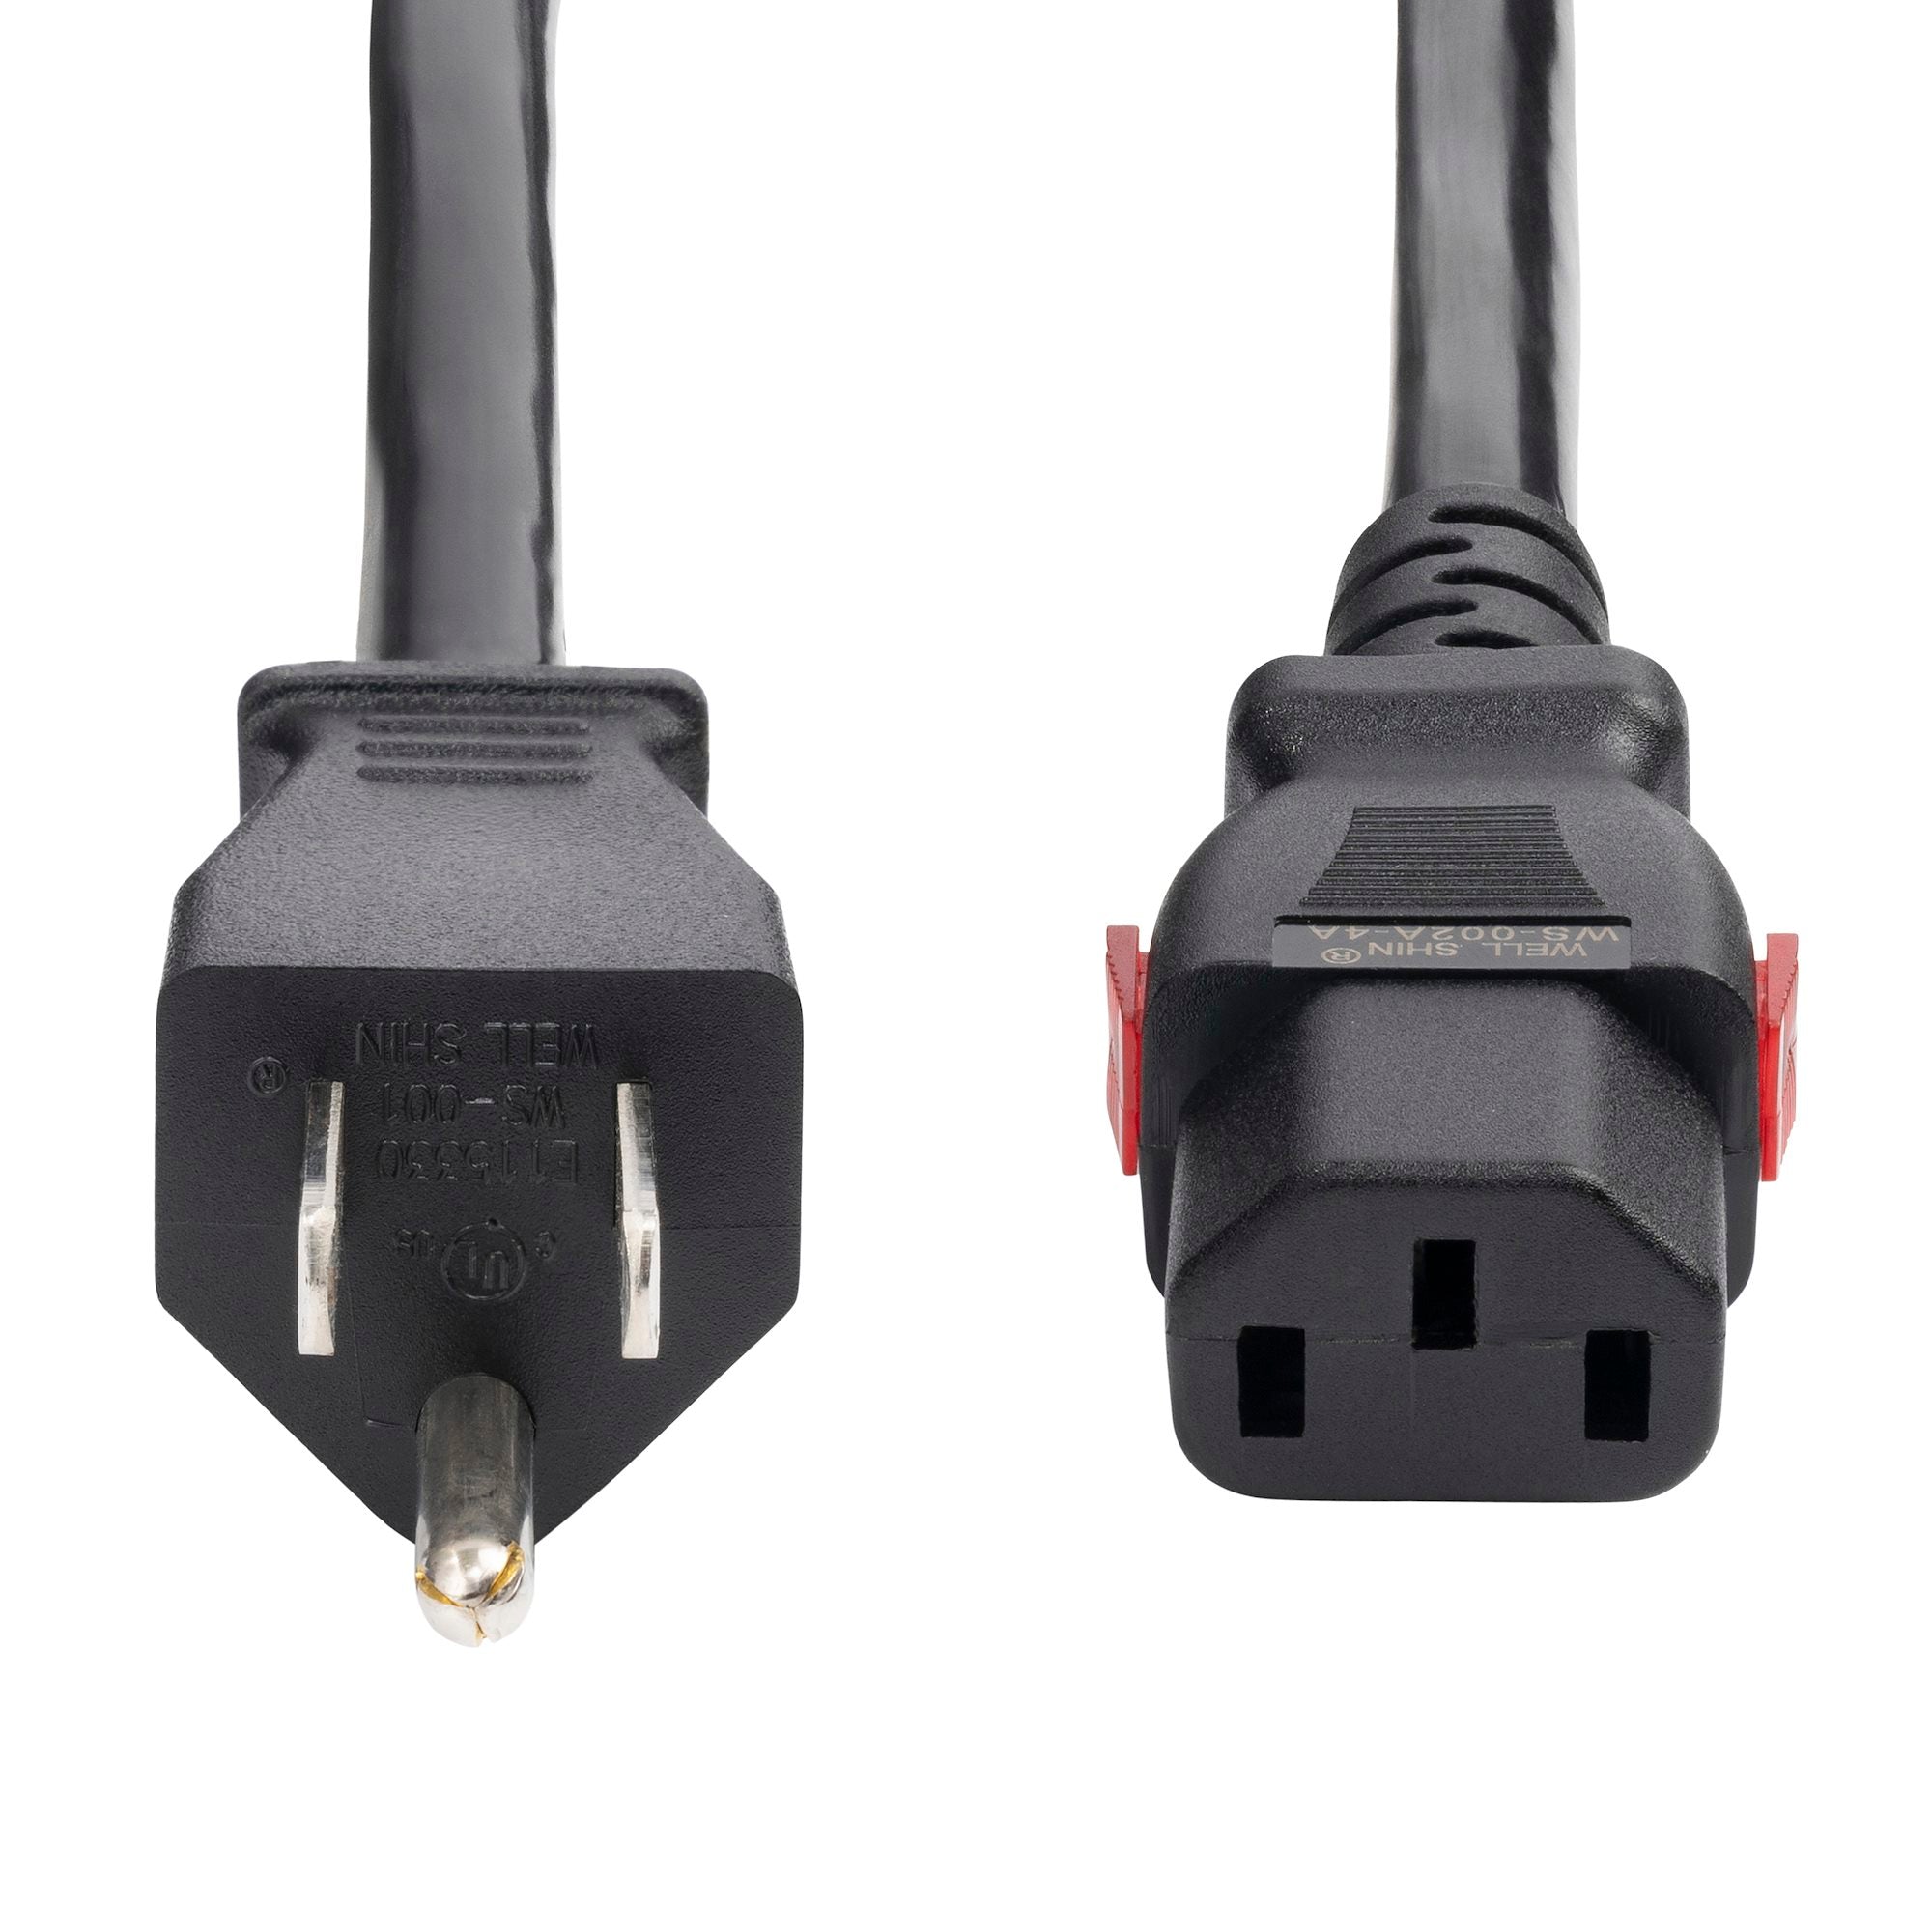 Startech 27LC-4B00-POWER-CORD 12ft (3.6m) Heavy Duty Power Cord, NEMA 5-15P to Locking IEC 60320 C13 AC Power Cable, 15A 125V, 14AWG, Replacement Computer Power Cord, PC Power Supply Cable - UL Listed Components